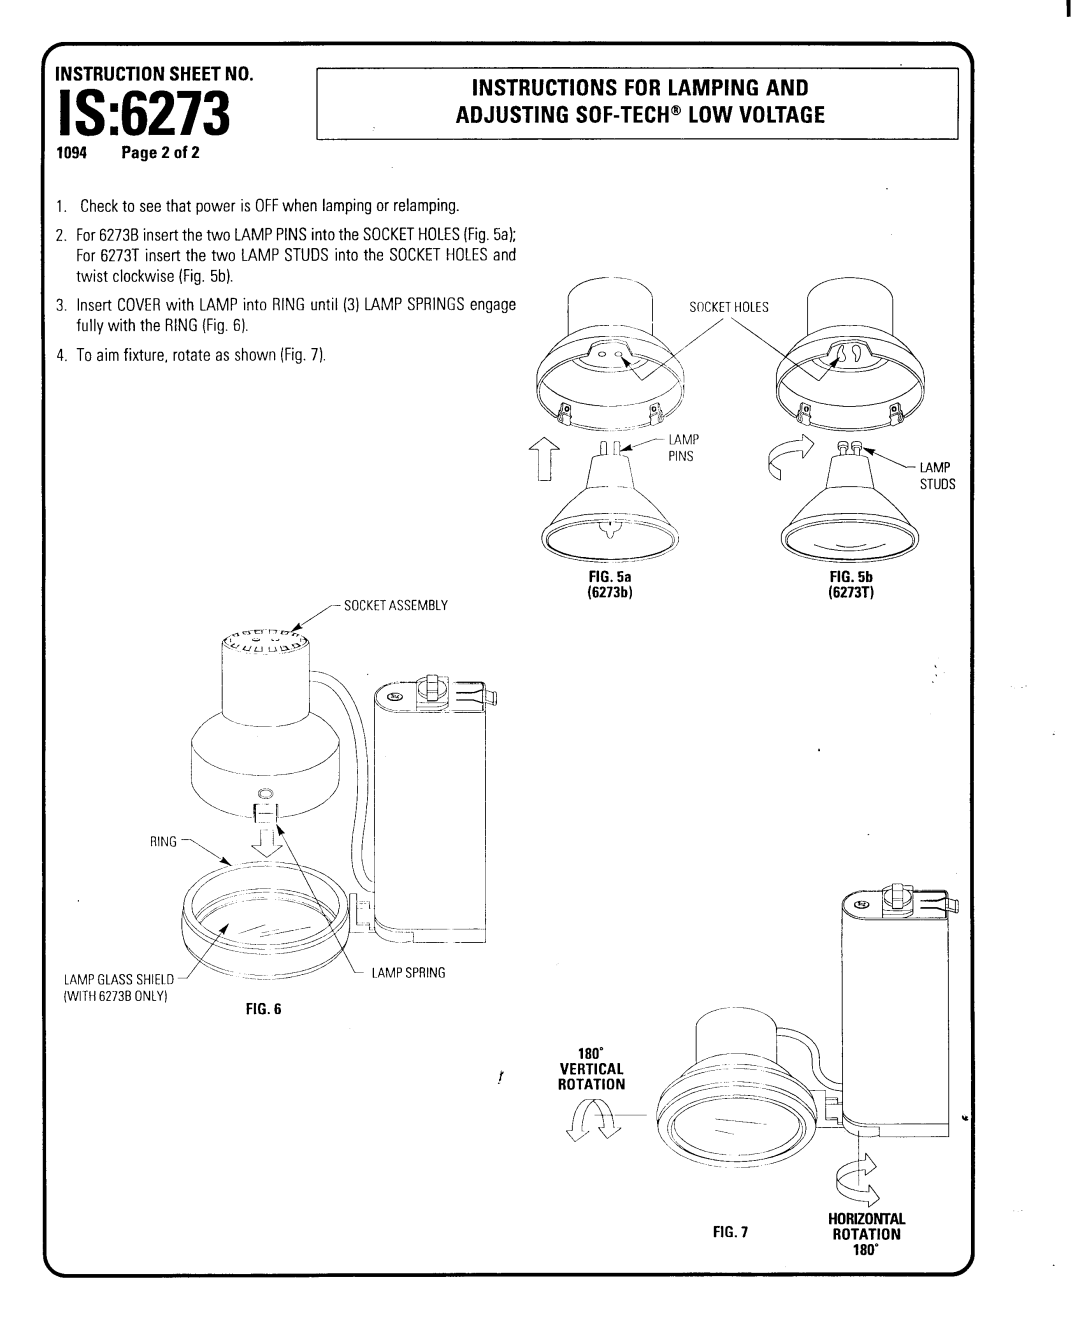 Lightolier 6273 Instructions For Lamping And, Adjusting Sof-Tech@Low Voltage, Instruction Sheet No, b, rVERTICAL ROTATION 